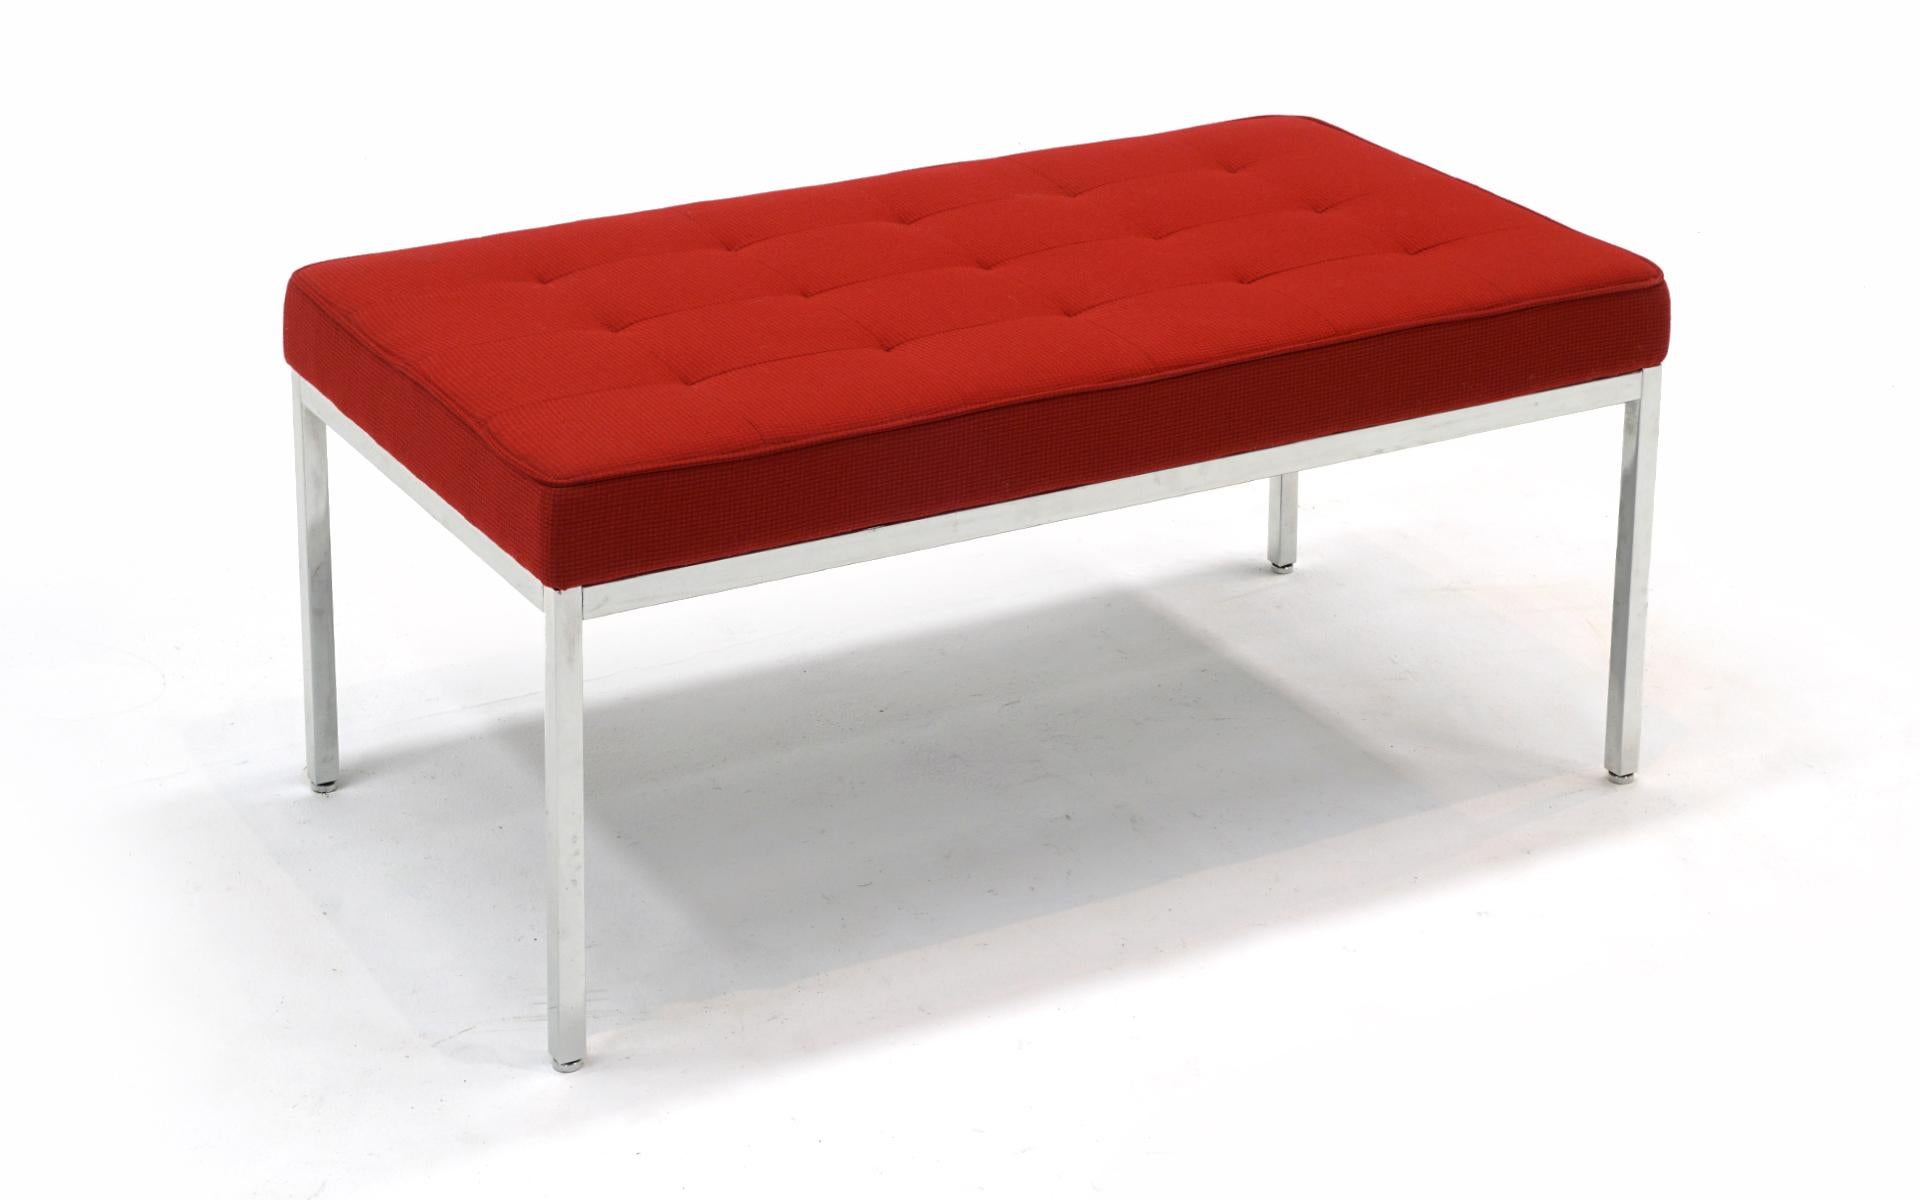 Mid-Century Modern Three Foot Bench by Florence Knoll, Red Knoll Fabric, Chrome Frame, Signed